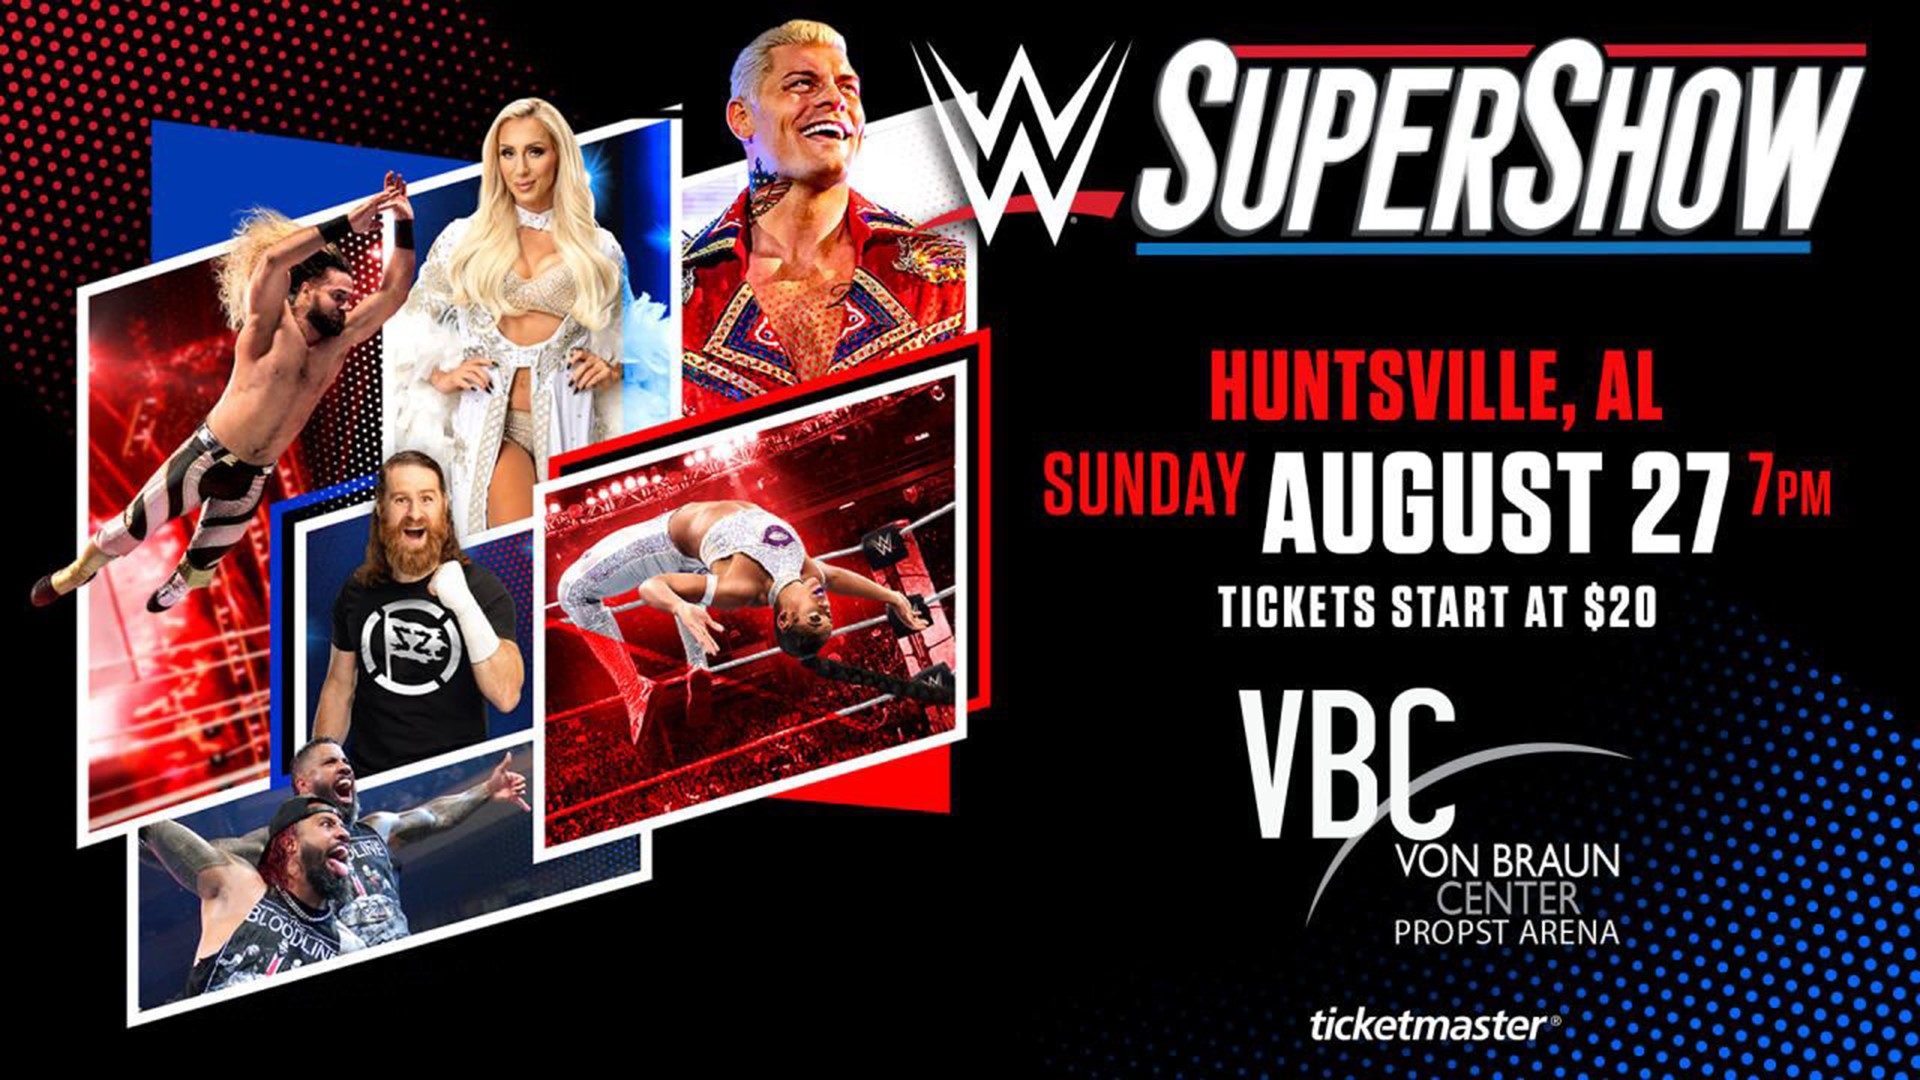 Enter to win floor tickets to WWE Super Show at the VBC